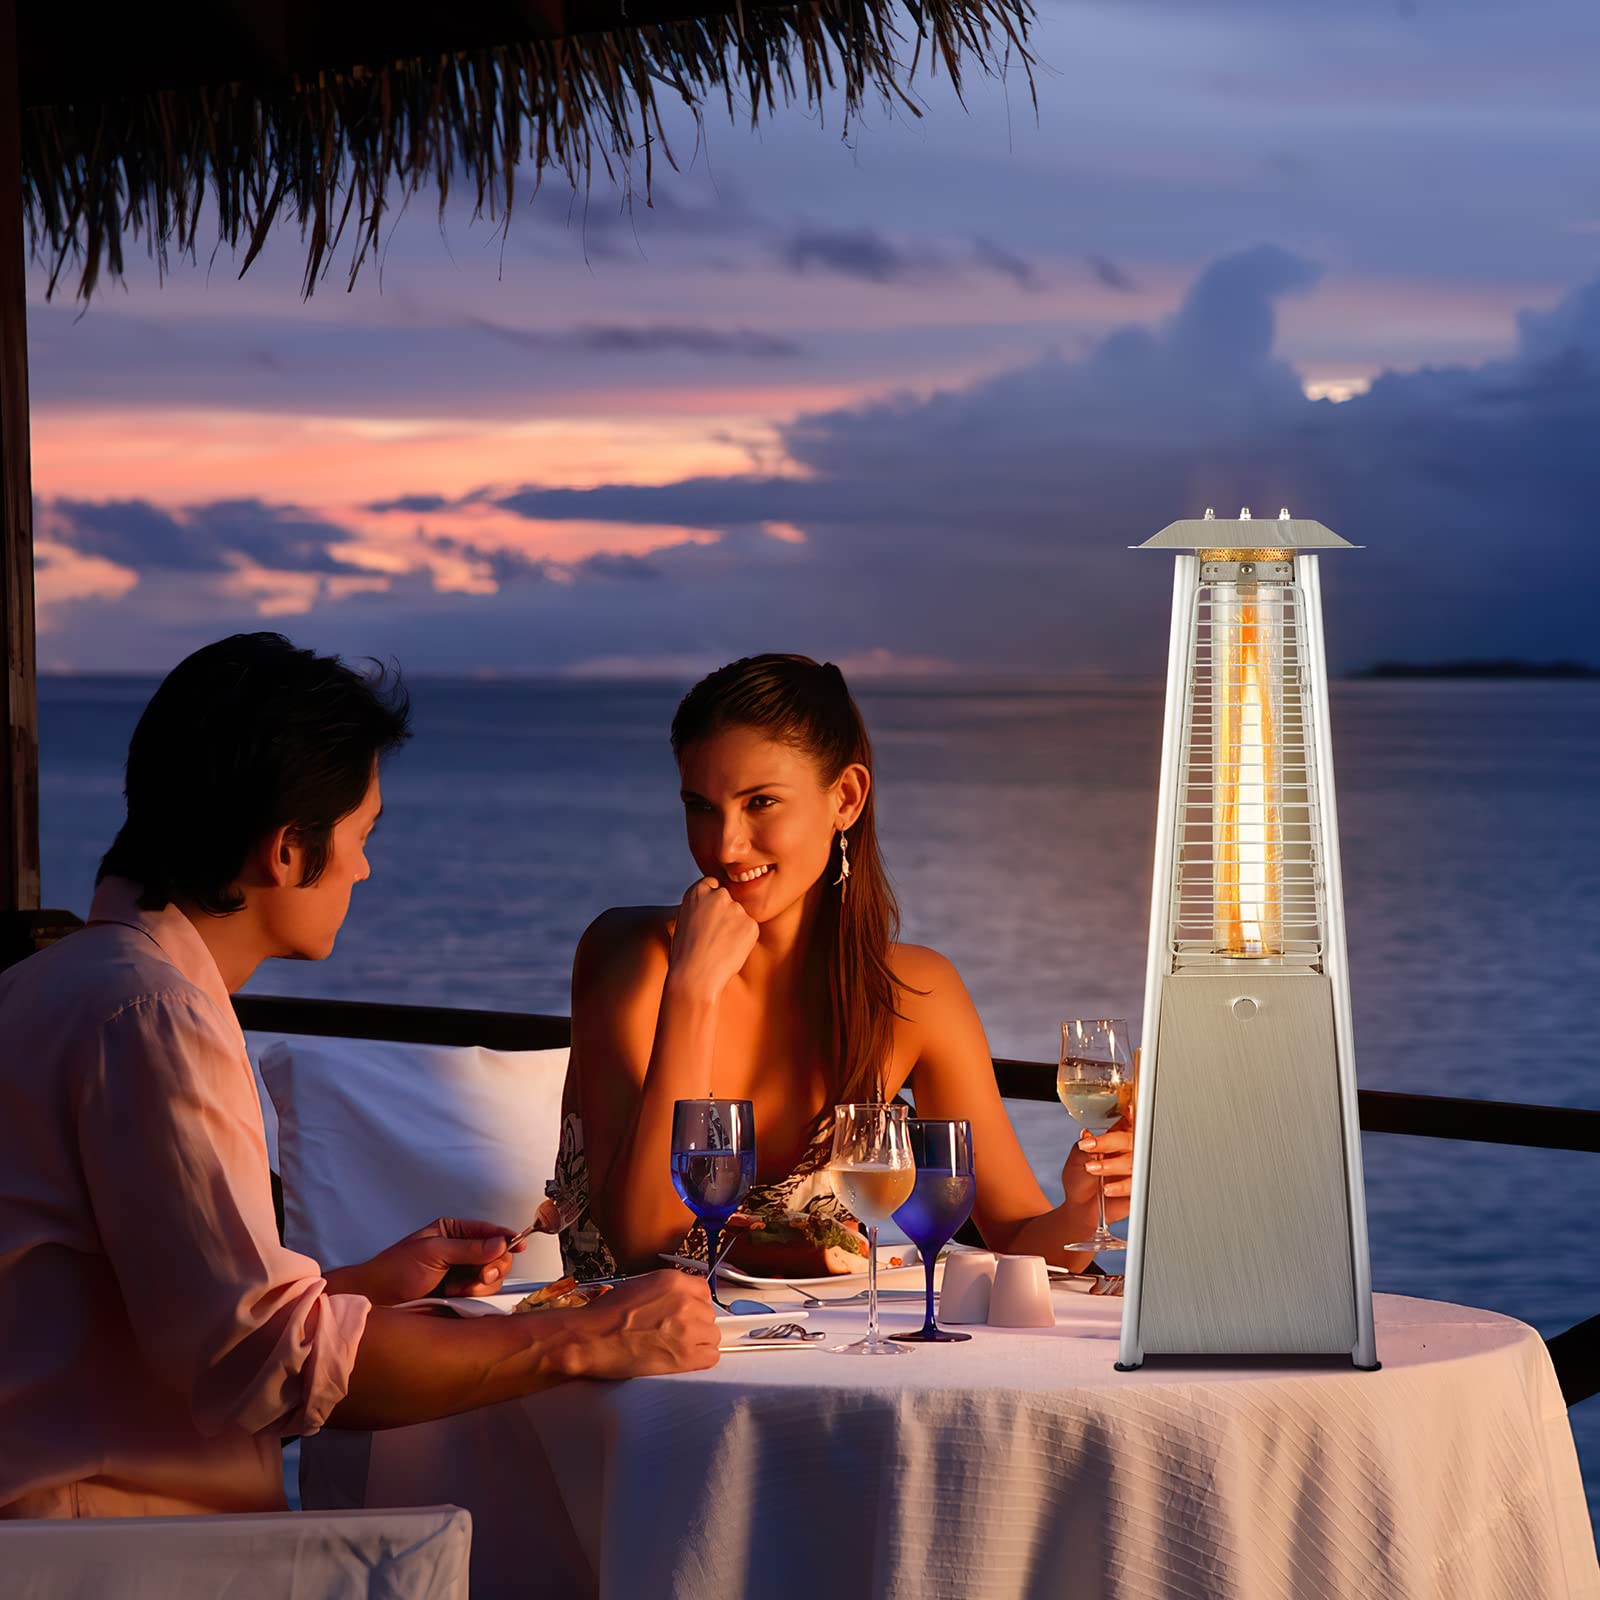 Giantex Outdoor Heaters for Patio - 35" Outside Portable Tabletop Patio Heater, 9500 BTU